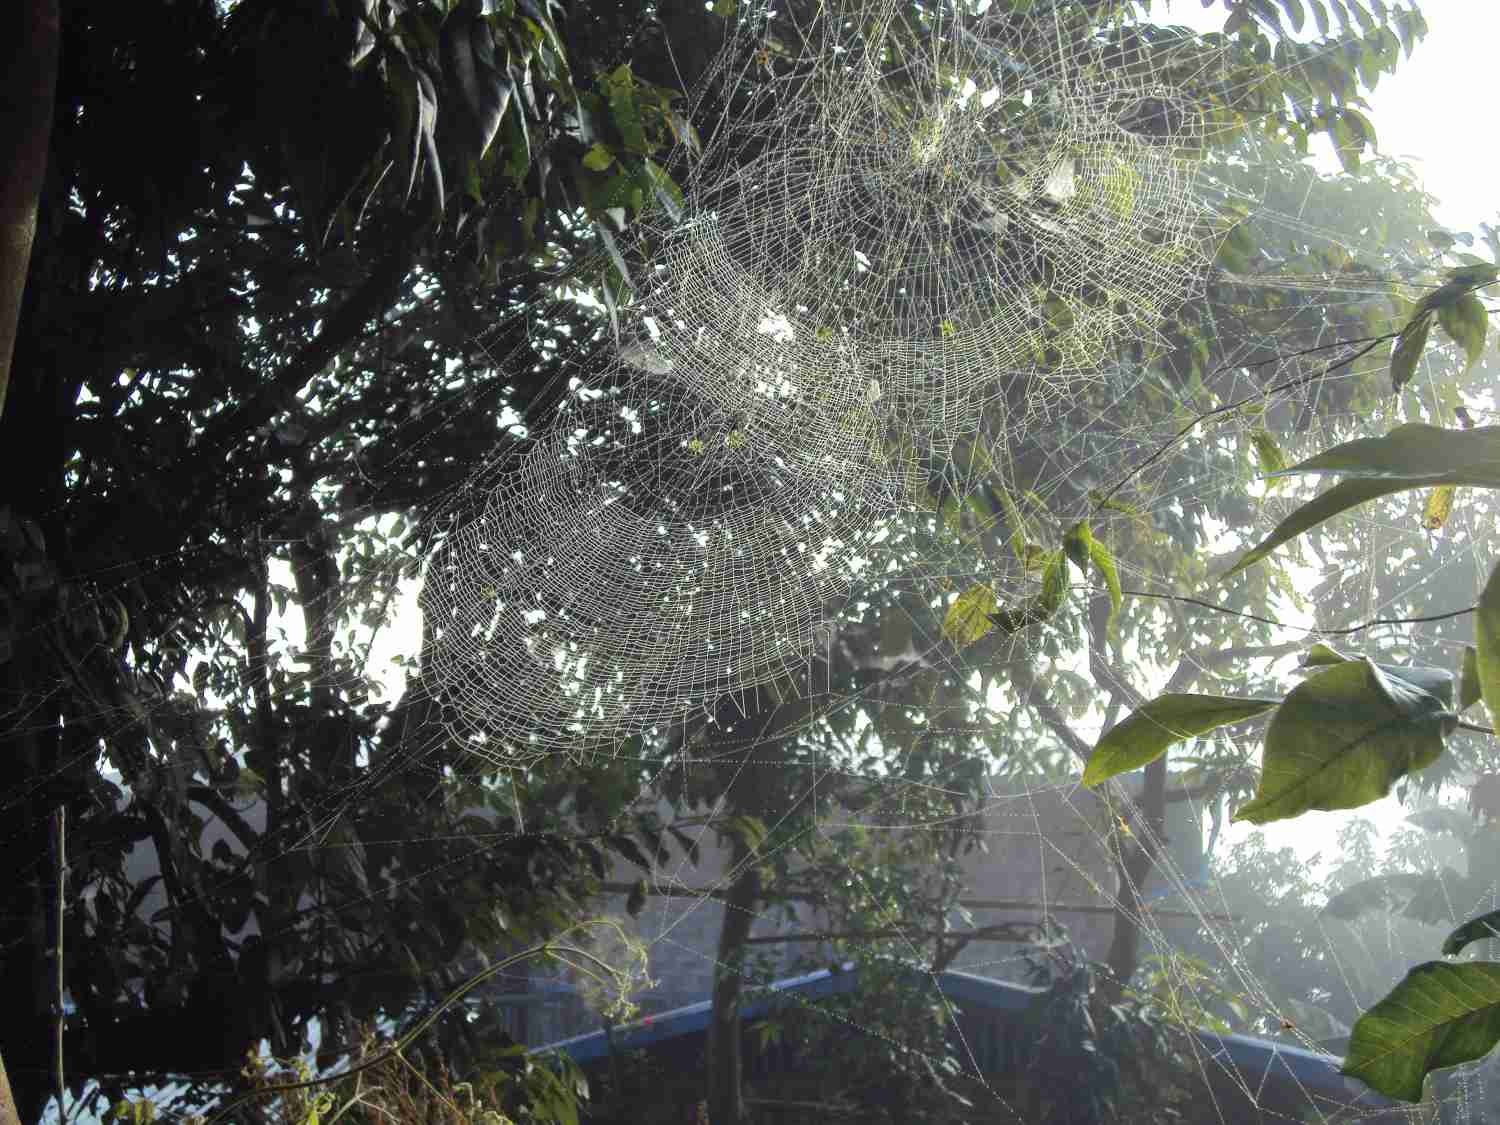 Spider webs in the trees